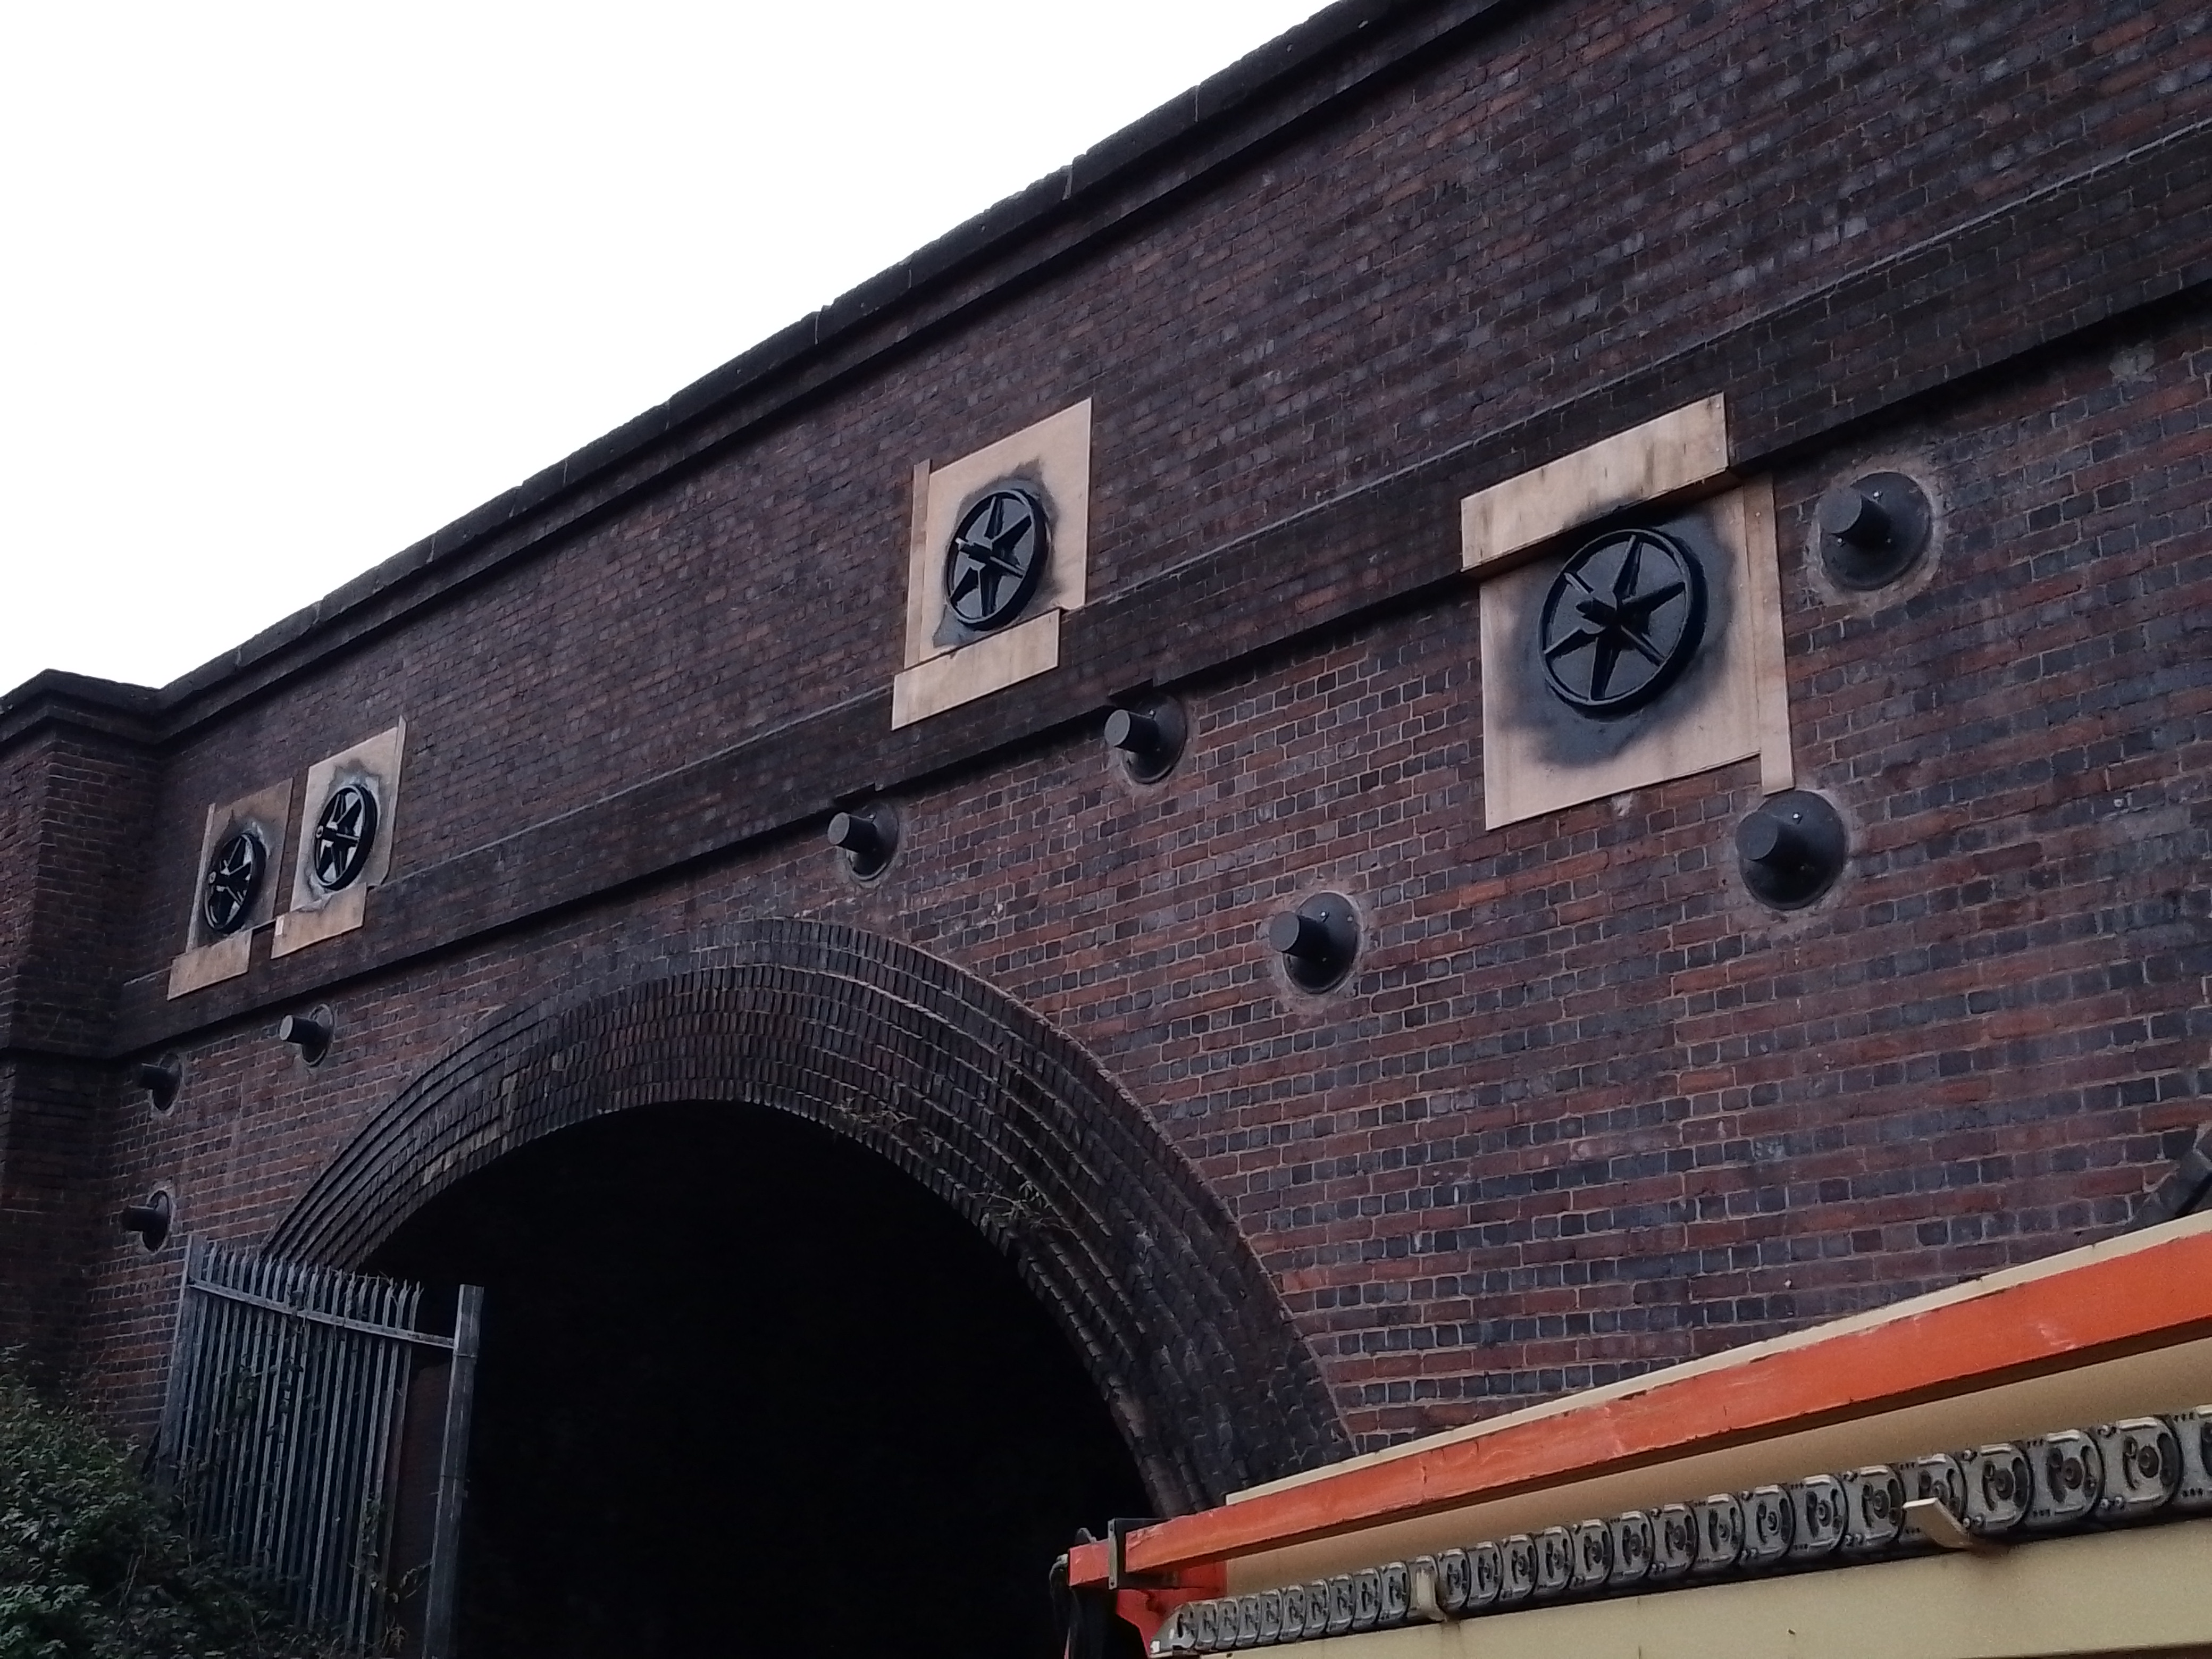 Image of the brick built viaduct with circular metal features